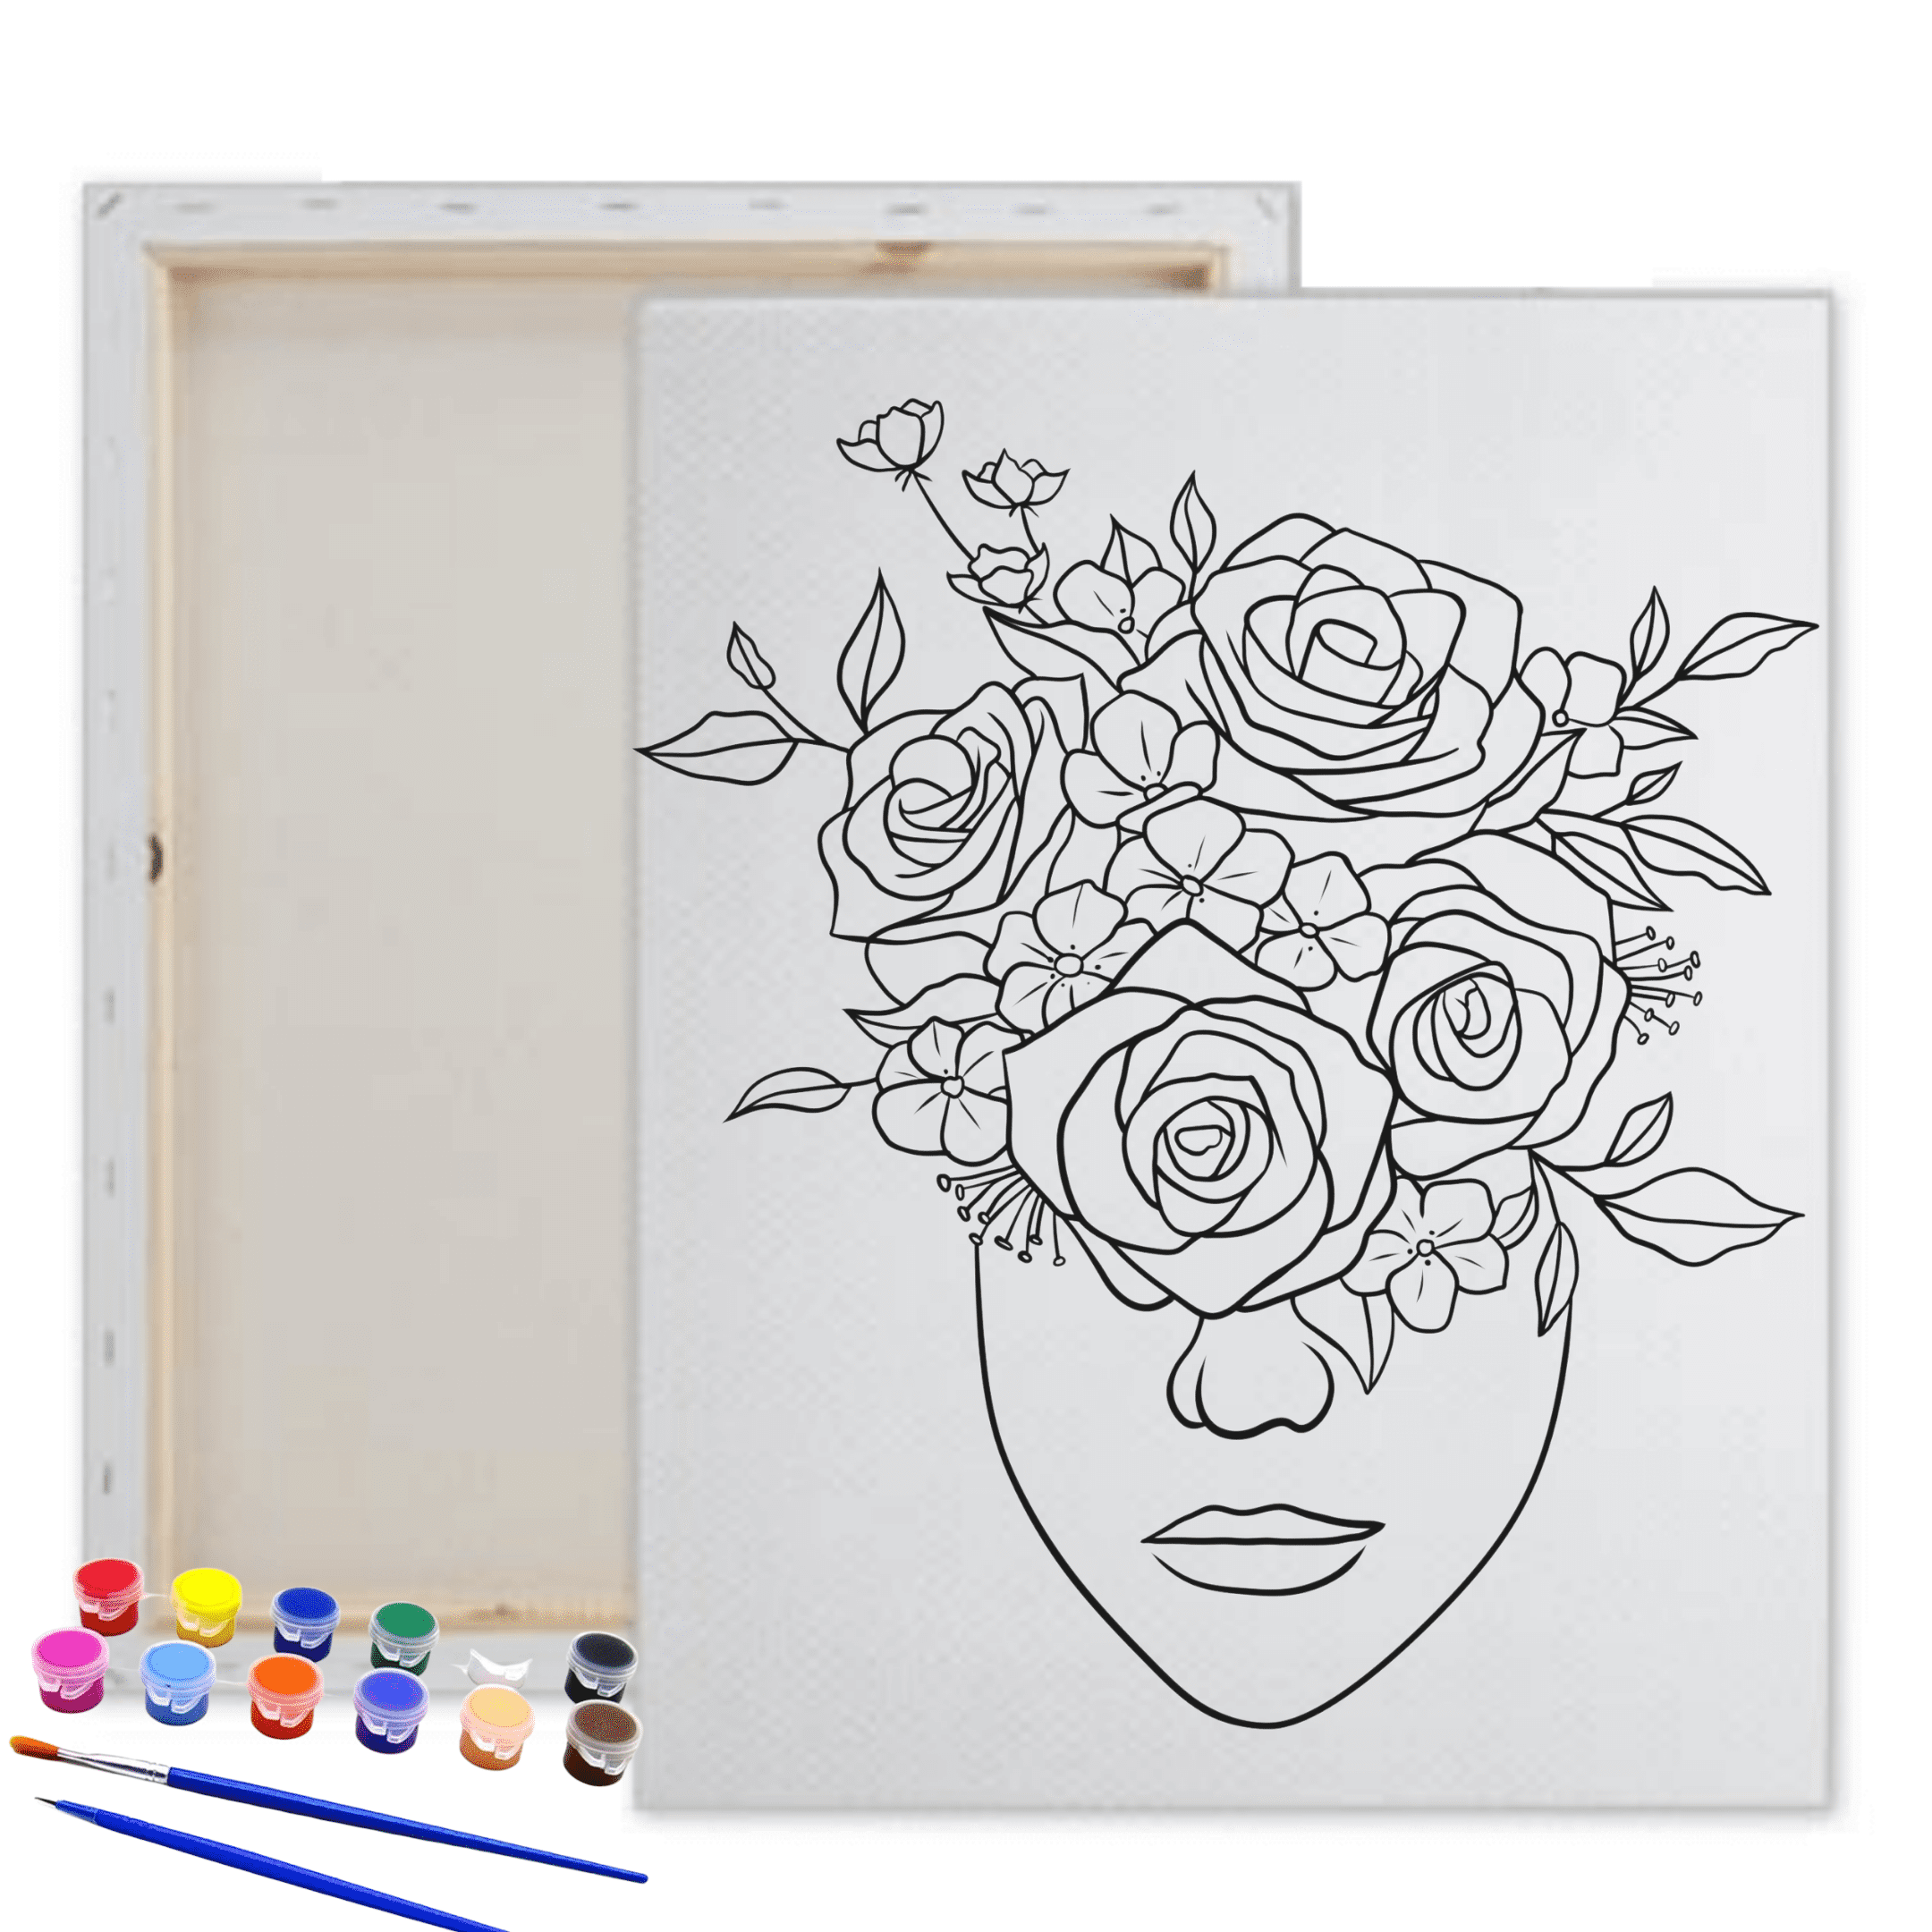 Predrawn Canvas/ City Girl/ Paint and Sip / DIY Art Kit/paint Party  /presketched Canvas /preprinted Canvas /teen Paint Party/ Adult Painting 